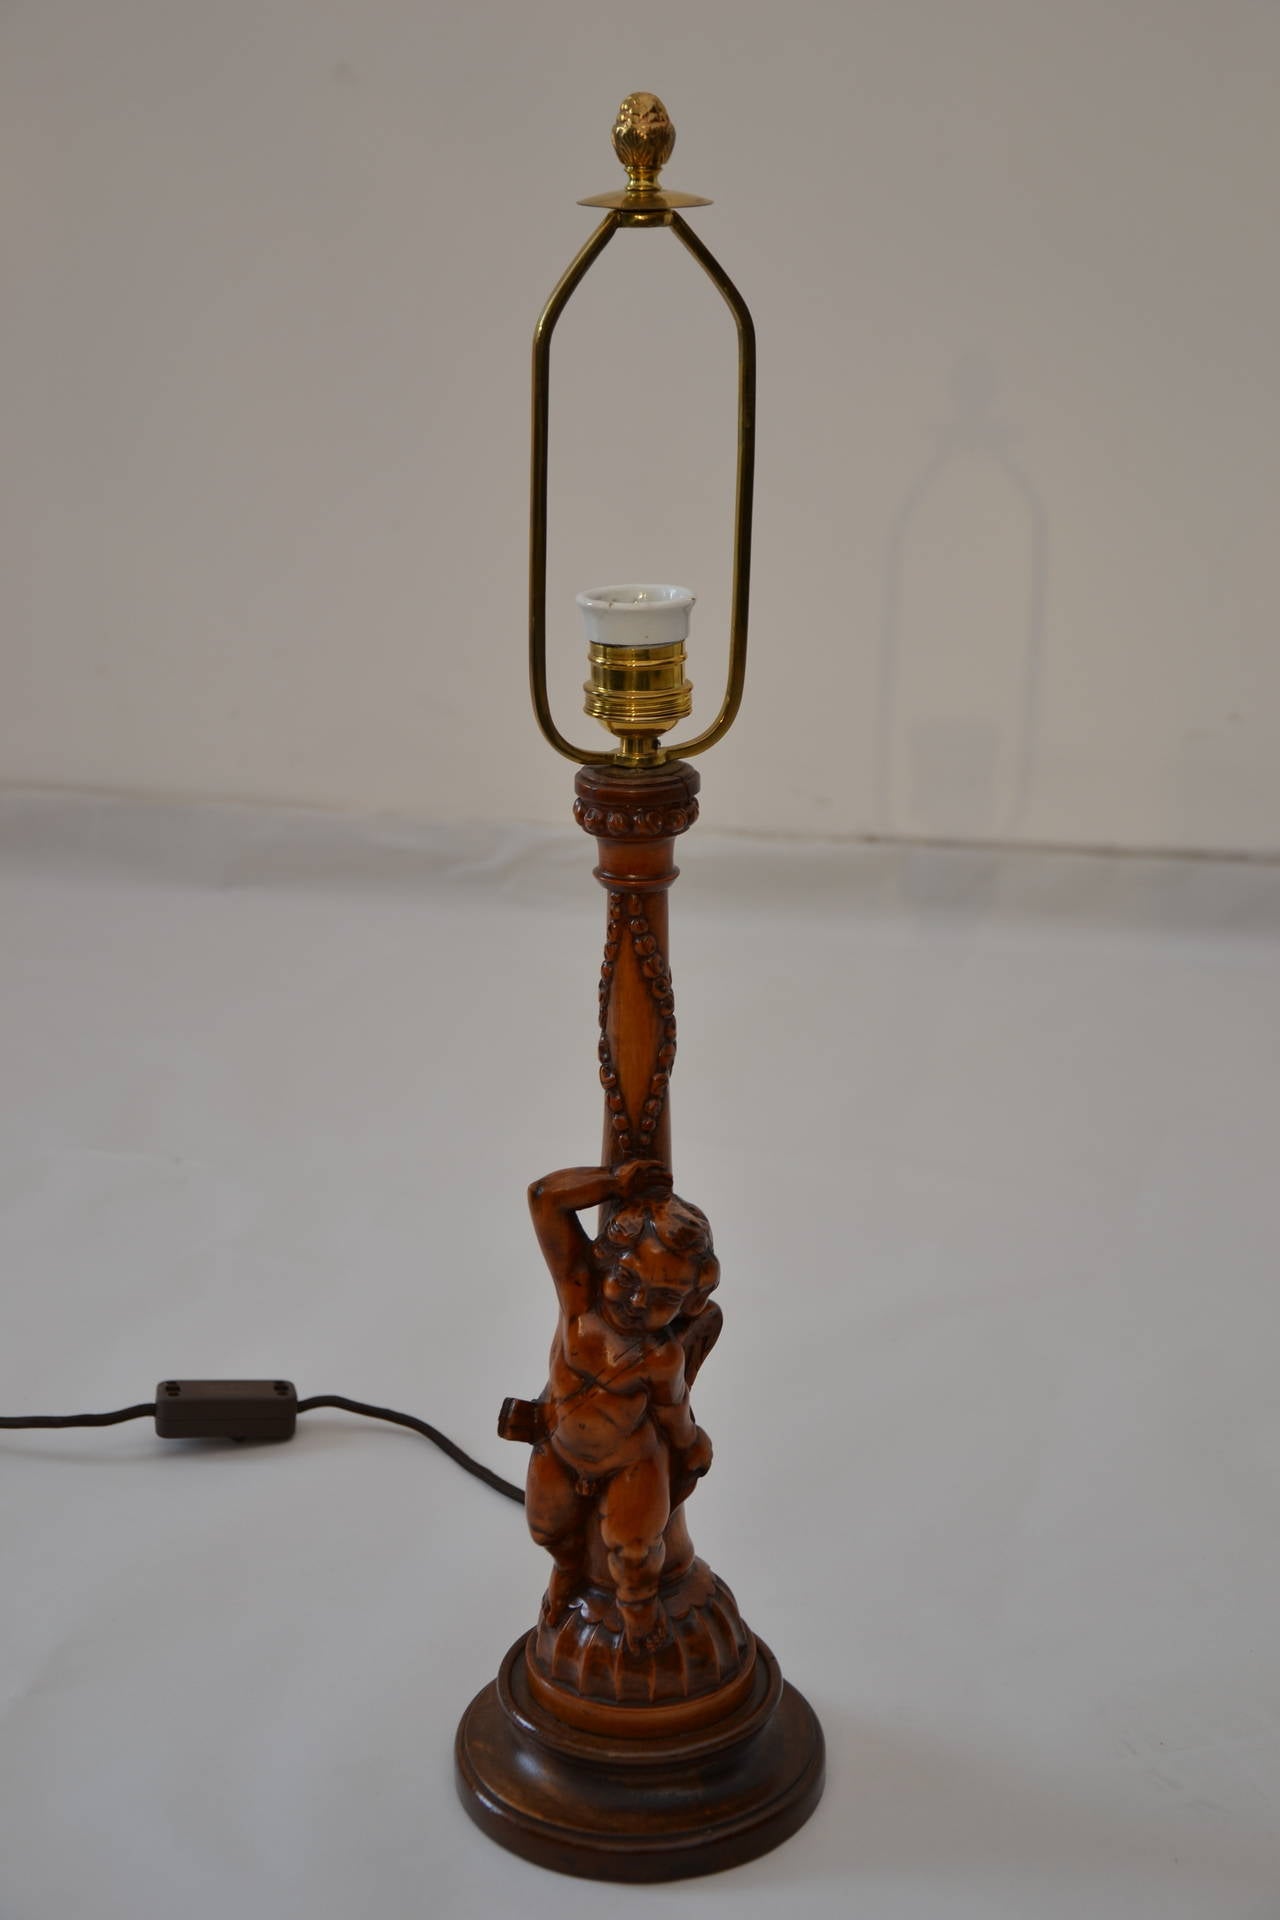 Carved wooden table lamp
Orignal condition